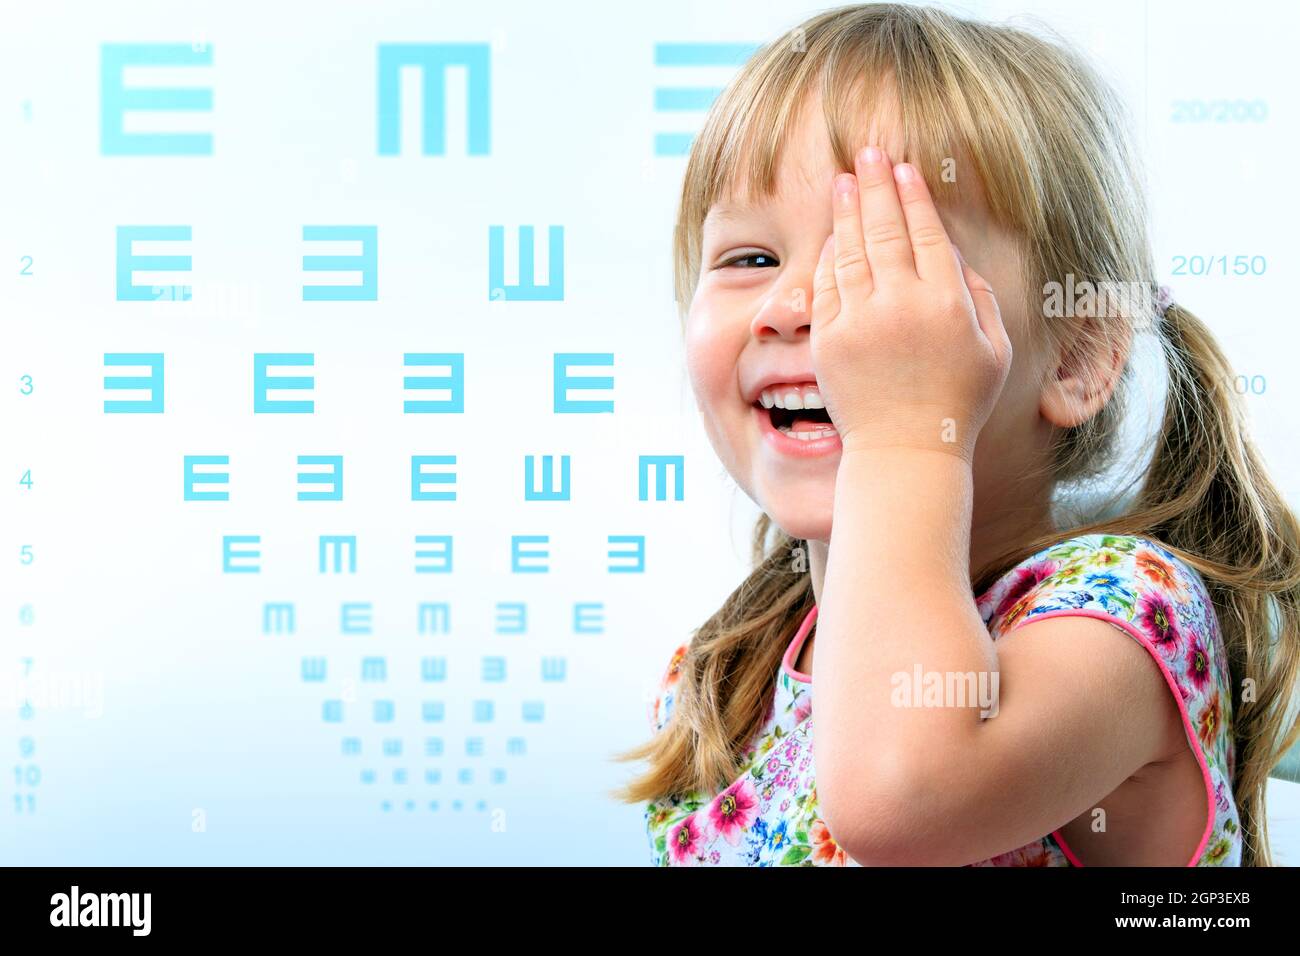 Close up fun portrait of little girl testing eye sight.Vision test chart in background. Stock Photo